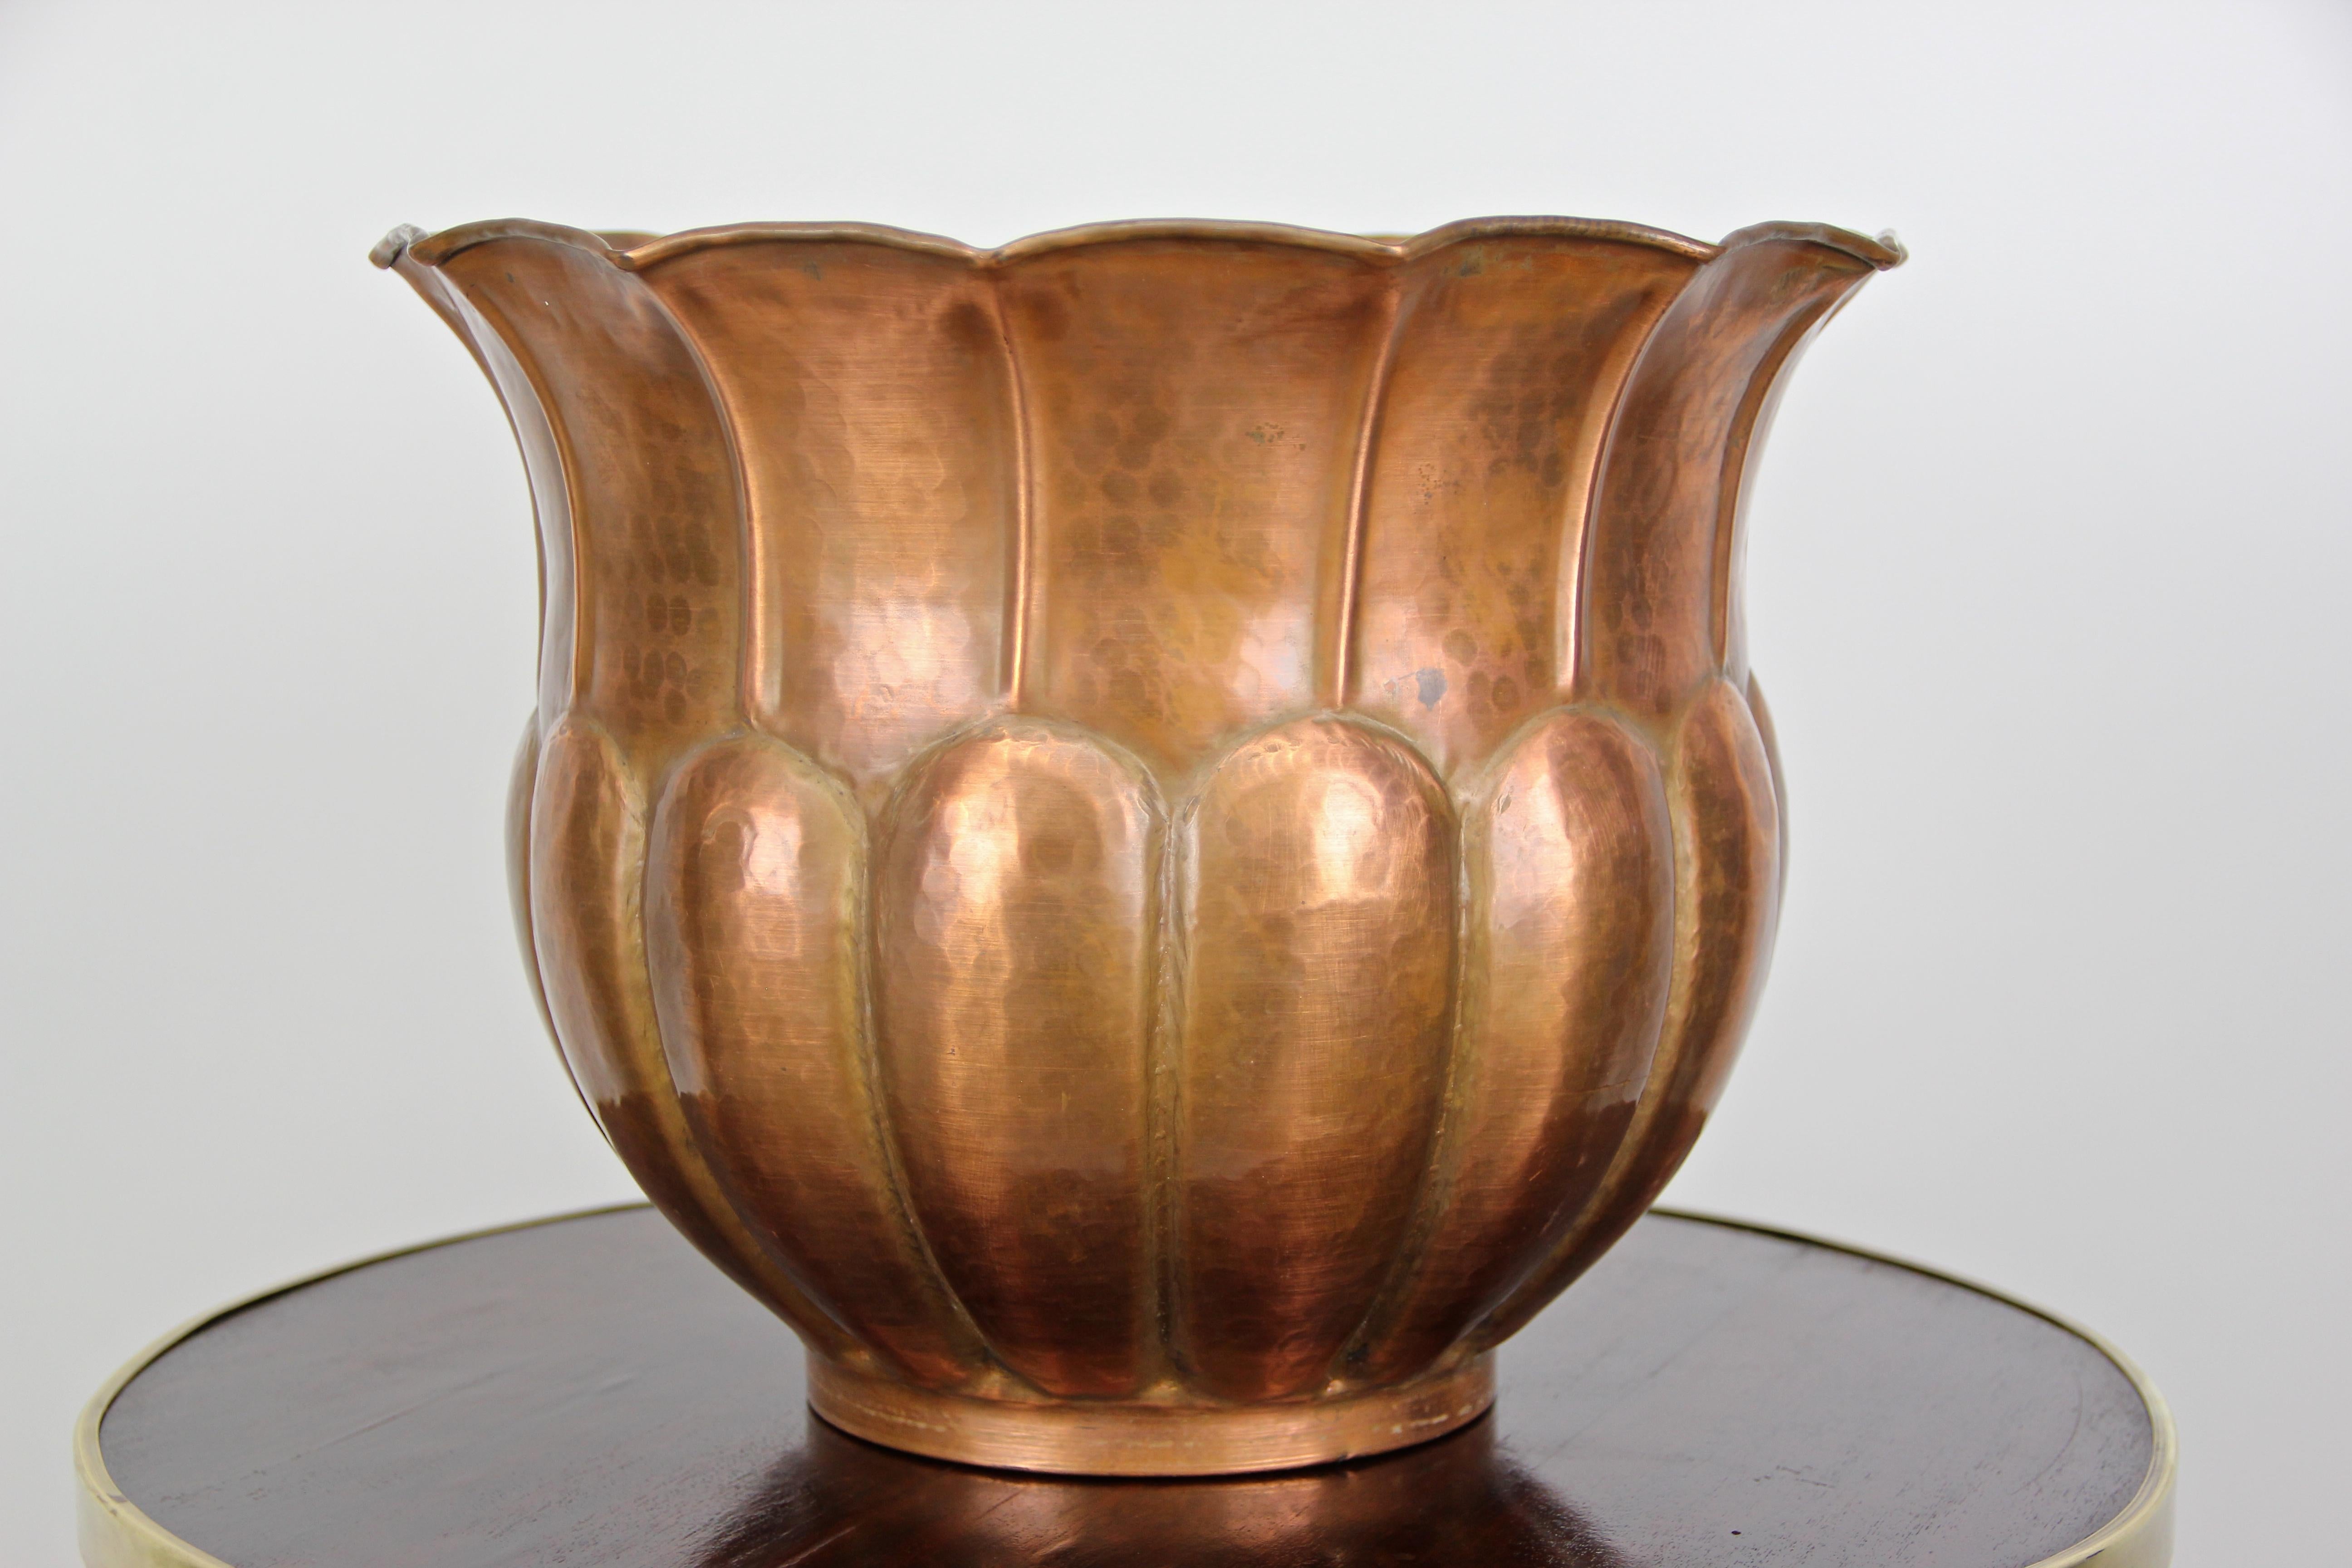 Very decorative copper planter or cachepot from the Art Nouveau period in Austria, circa 1910. This lovely designed planter shows a gorgeous bulby shape looking like a calyx. An amazing hammer finished design finalizes the great look of this